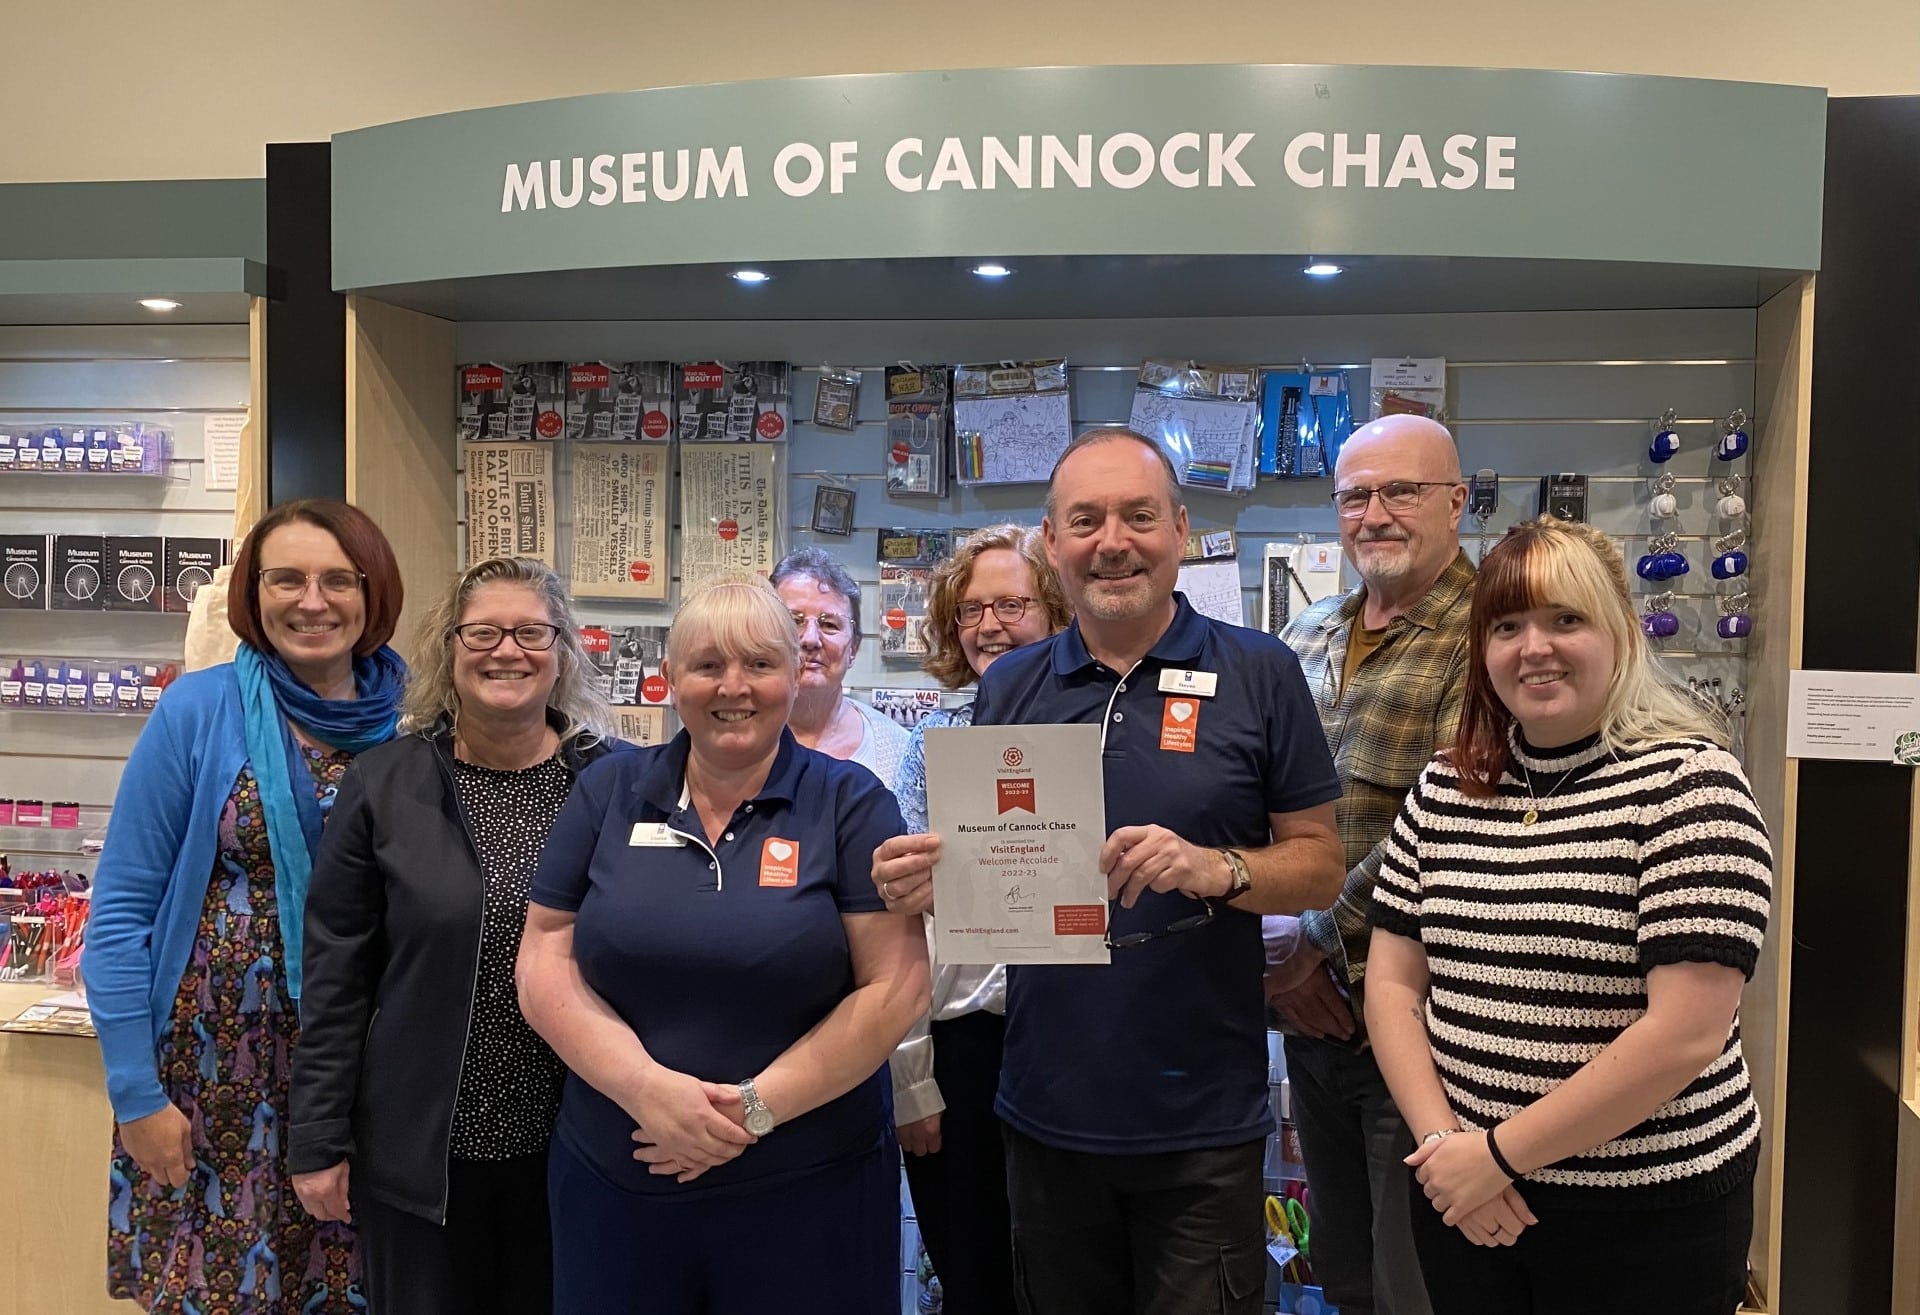 Lee Bellingham (lft) and the team at Cannock Chase Museum are all smiles with their latest award.